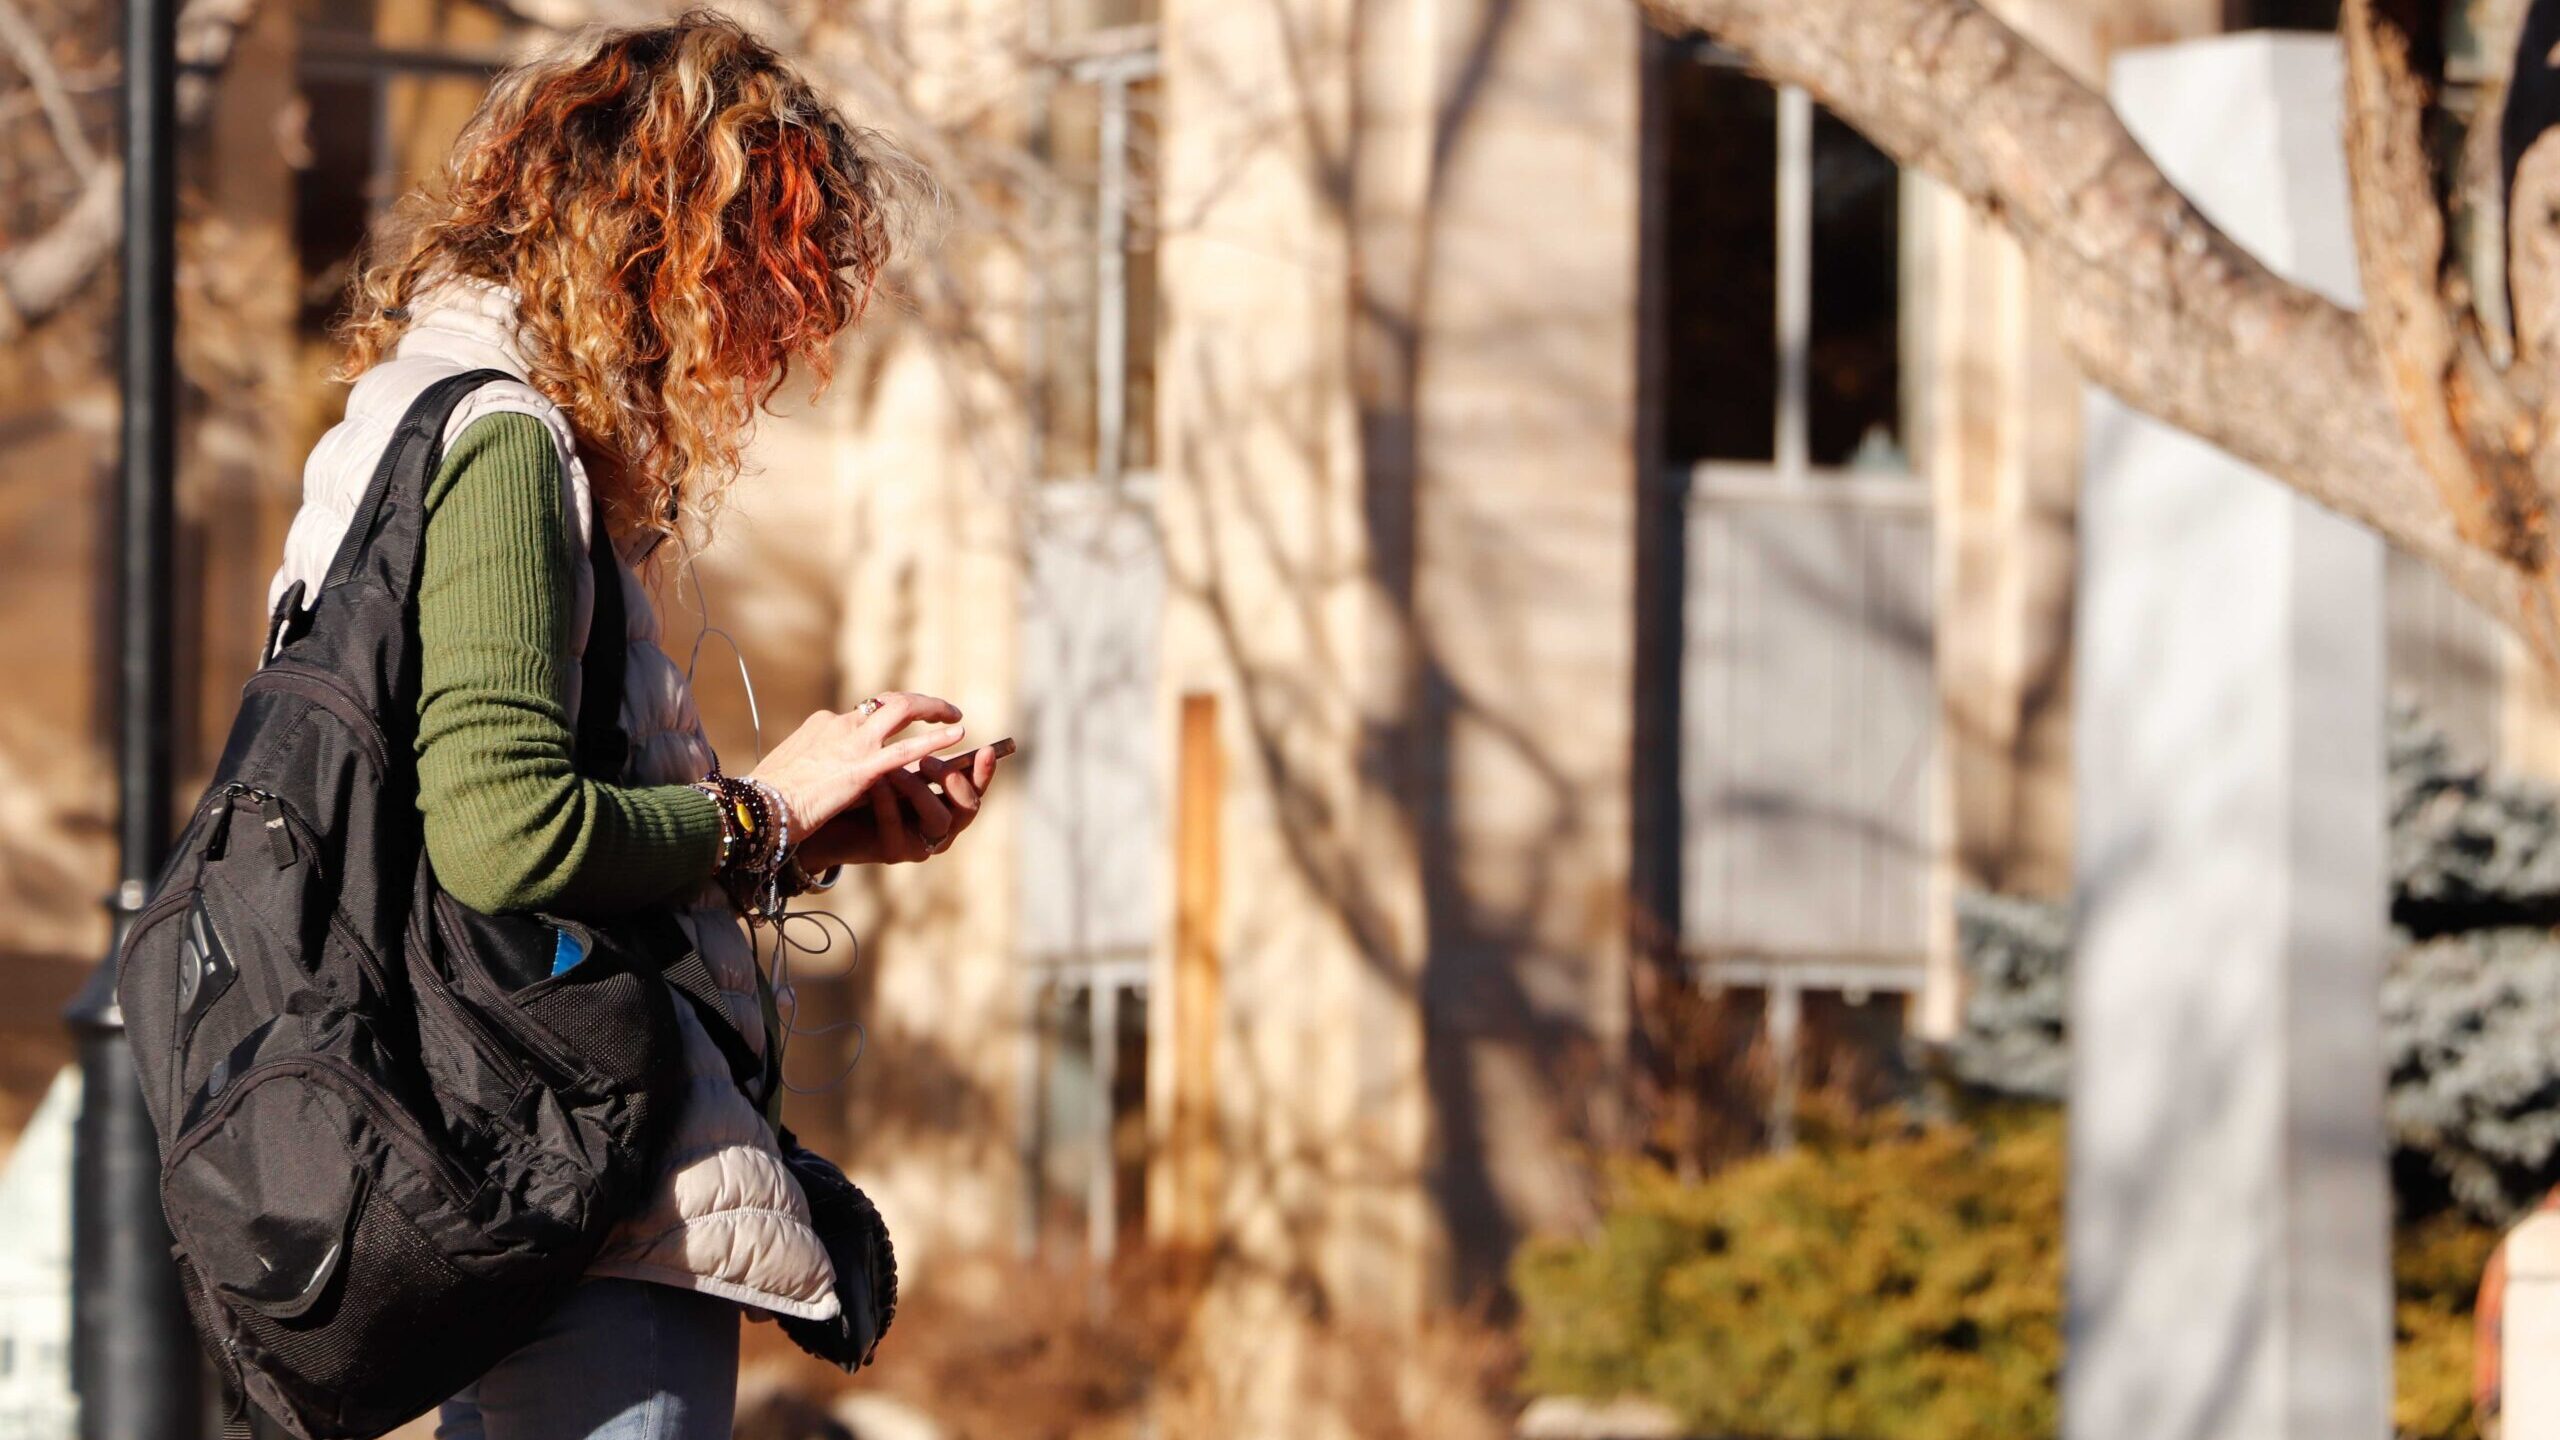 A woman with curly hair uses her smartphone. She stands in front of a blurry building and has a backpack slung over one shoulder.